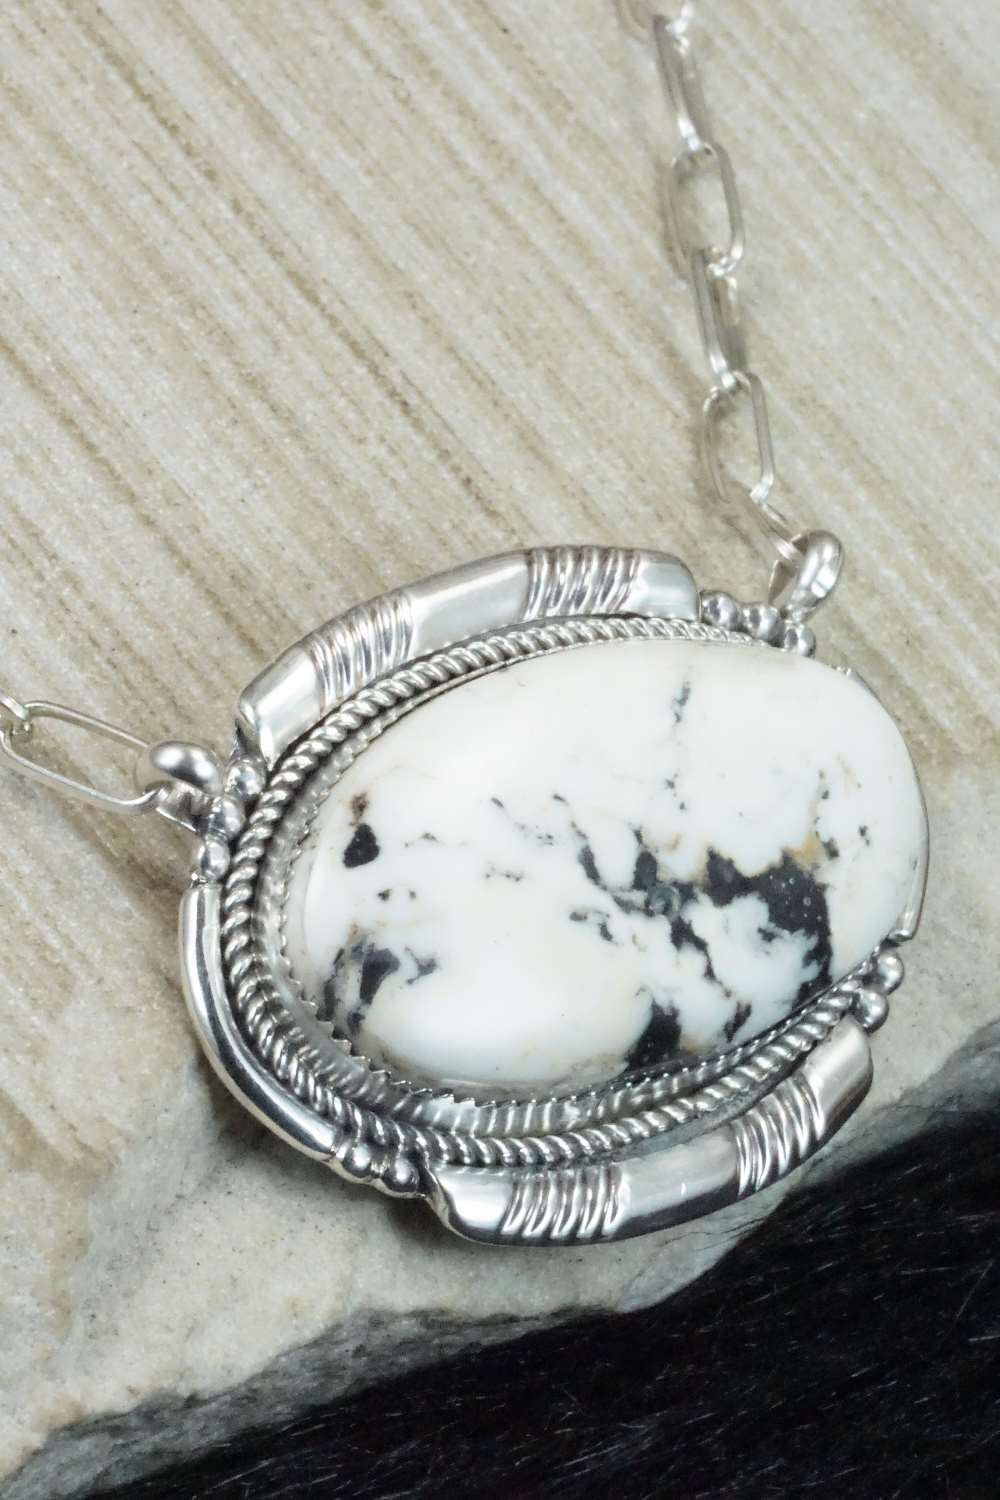 White Buffalo Turquoise Pendant Navajo Pearls Sterling Silver Necklace  11129 | eBay